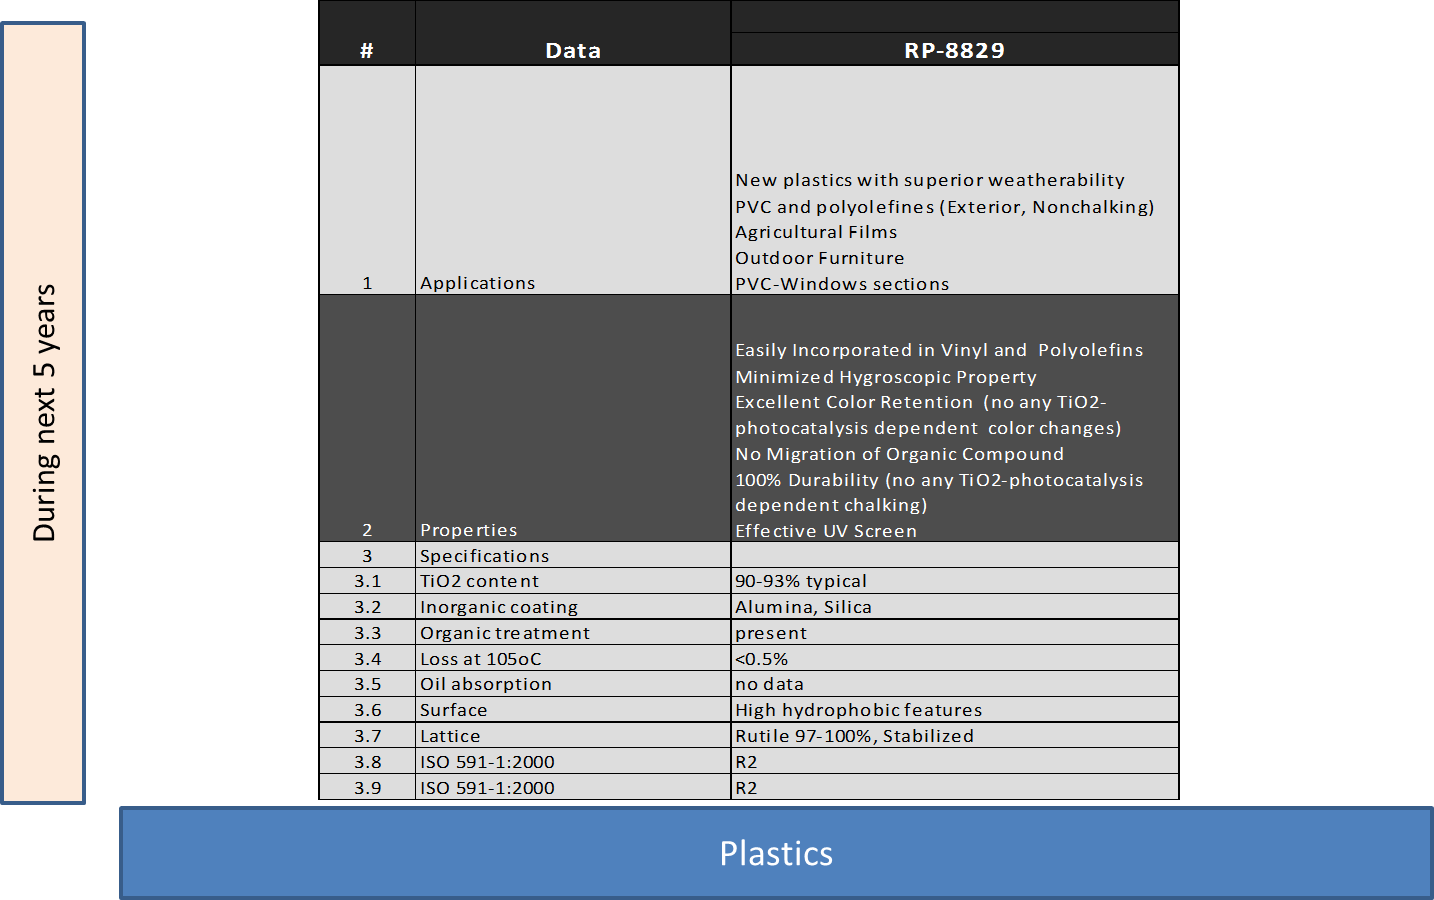 Characteristics of Plastic Grades Technologies and Know-How for RP-8829